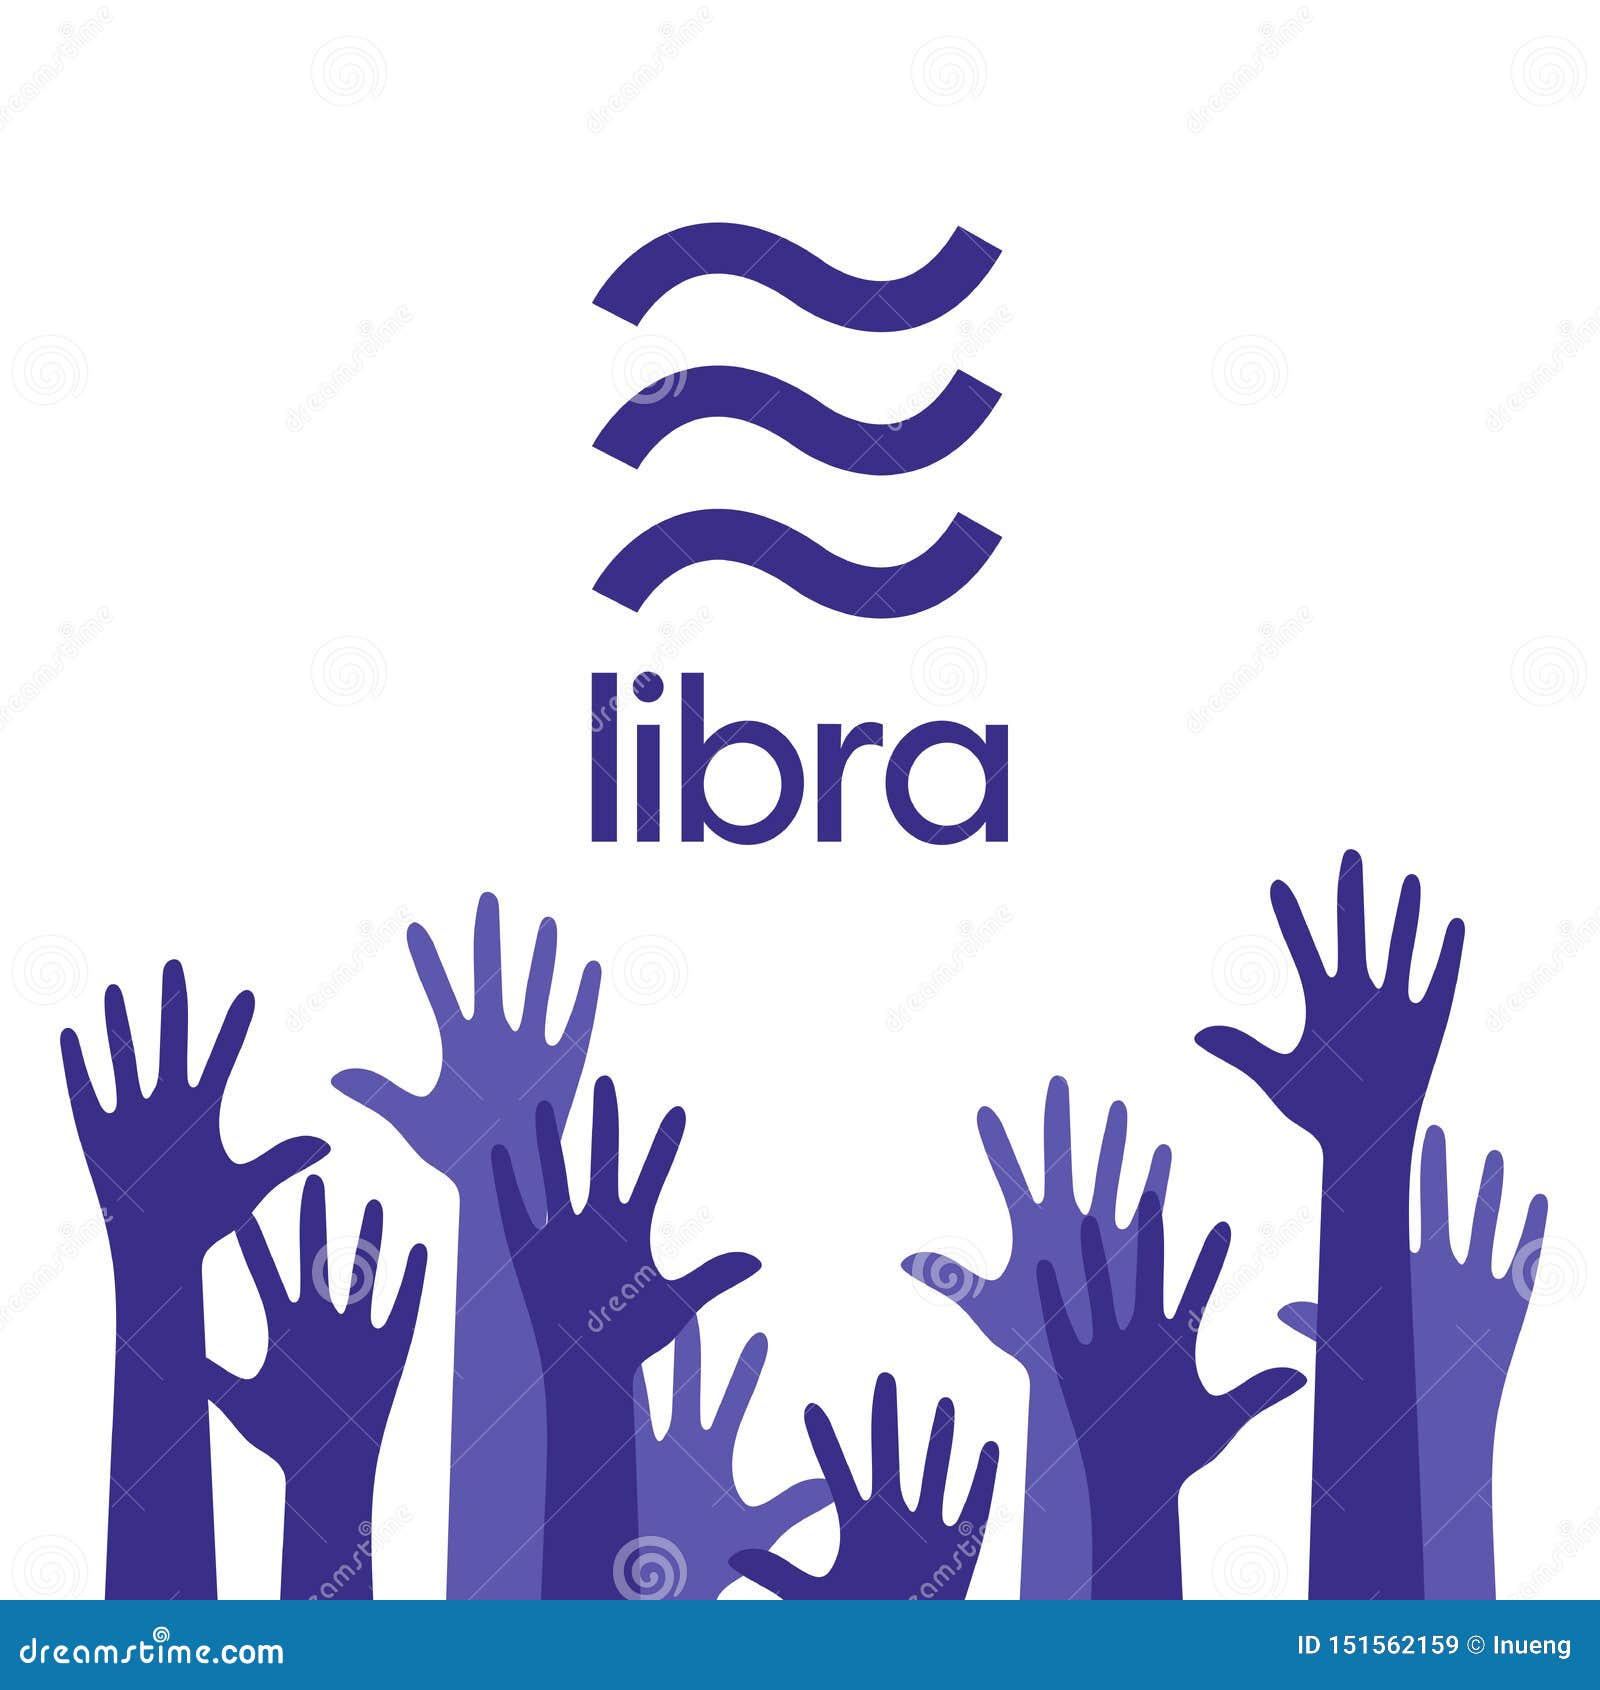 Libra Sign, Crypto Currency Virtual Electronic Money ...